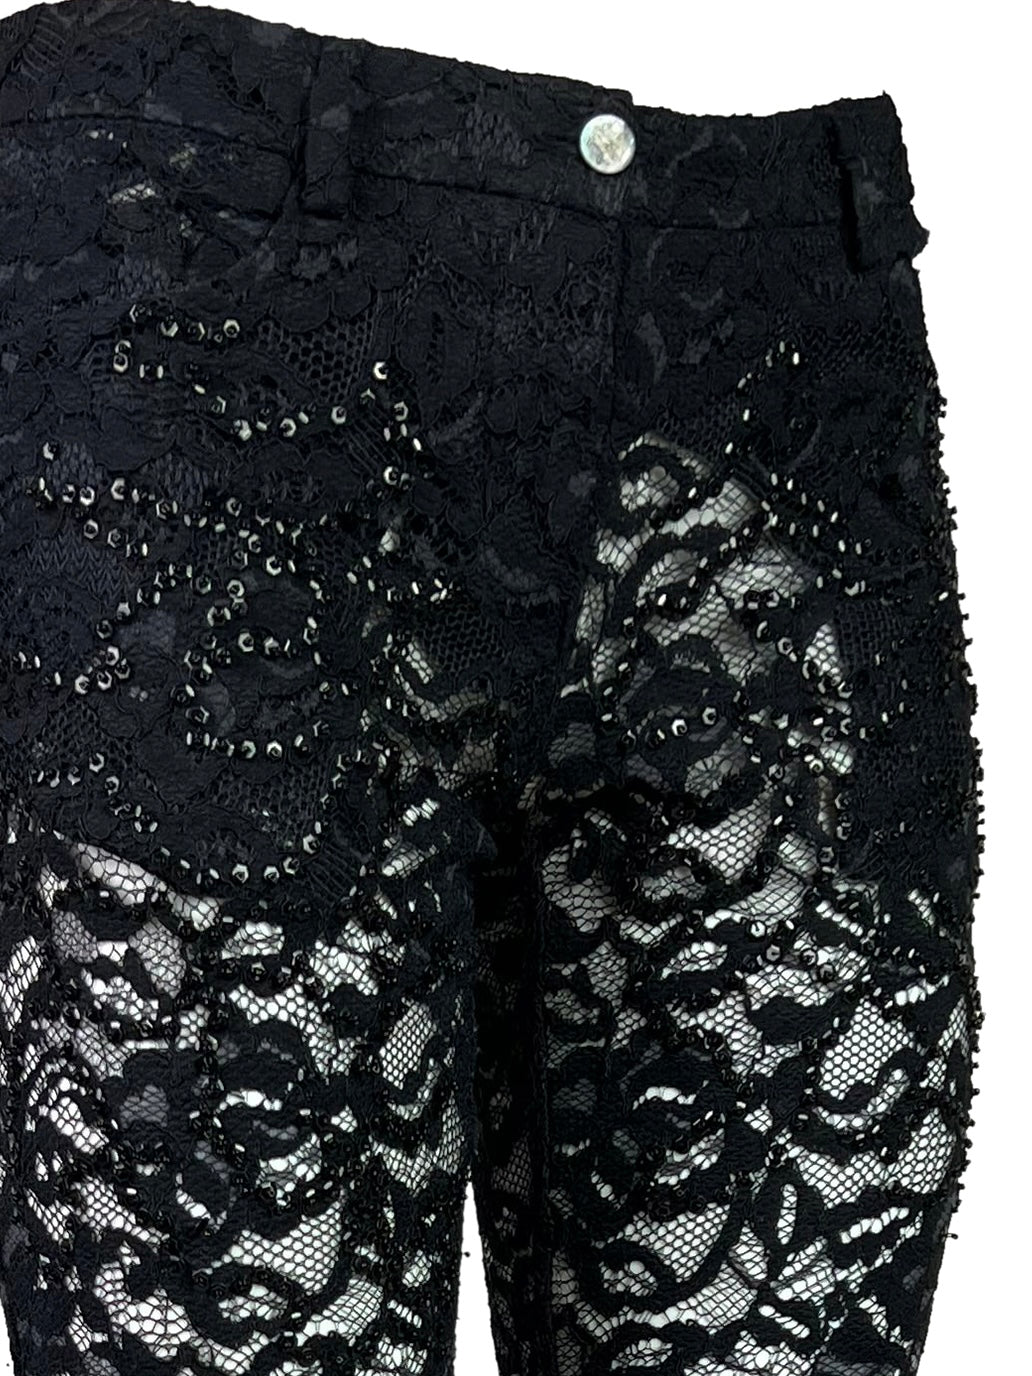 Alexander McQueen Spring 1999 Lace Trousers